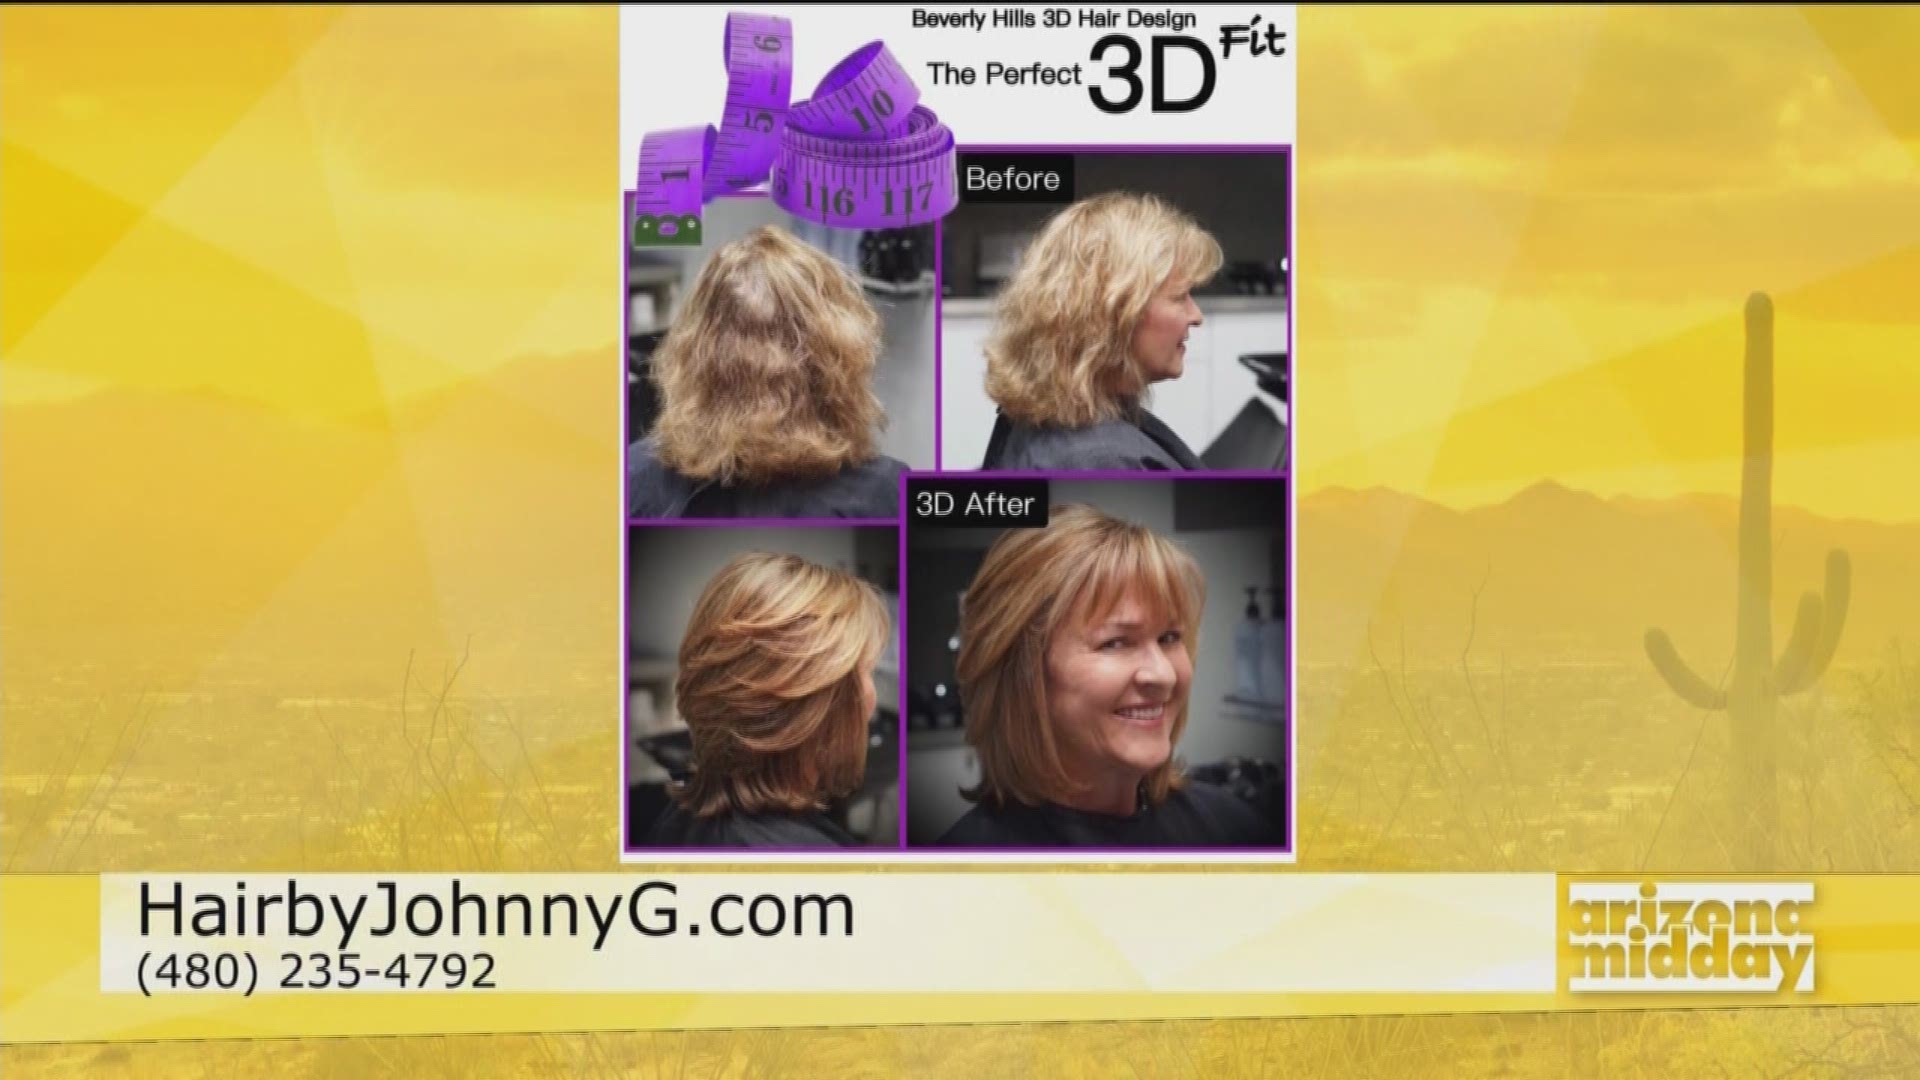 Hairstylist Johnny G. shows you how to get the perfect cut for your face shape.